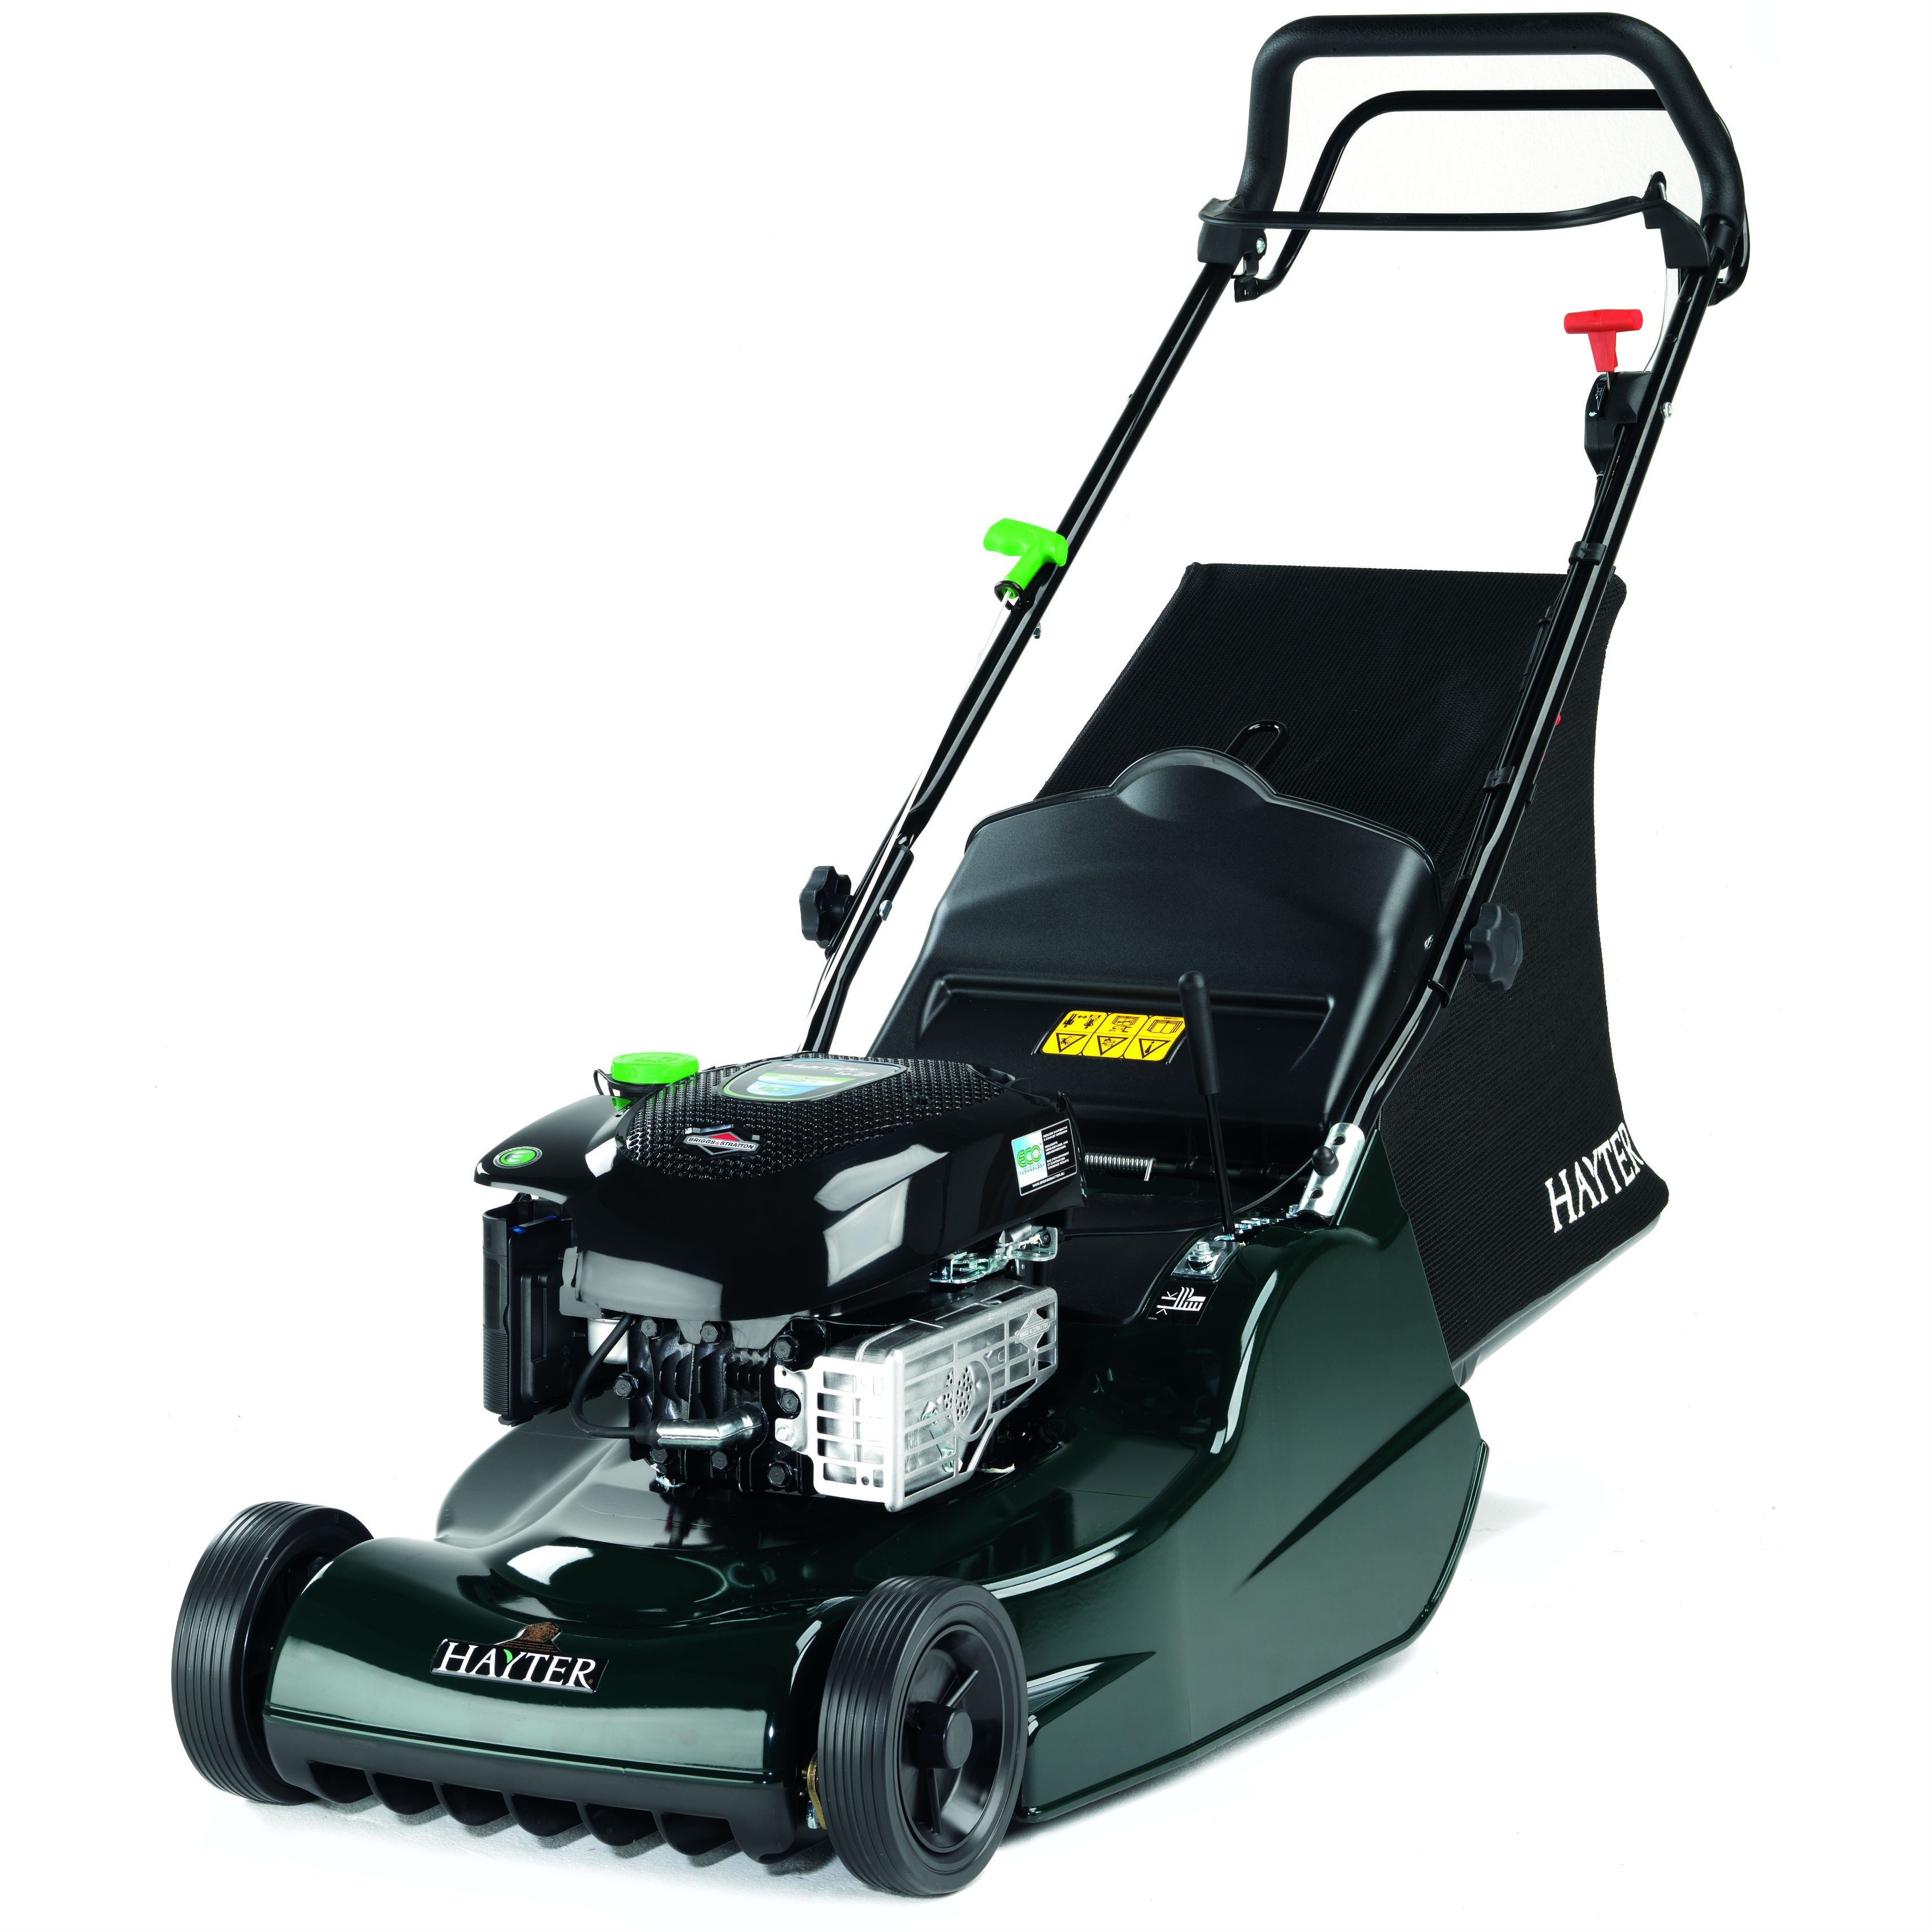 Hayter Harrier 48 Autodrive Rear-Roller Lawnmower with Variable ...